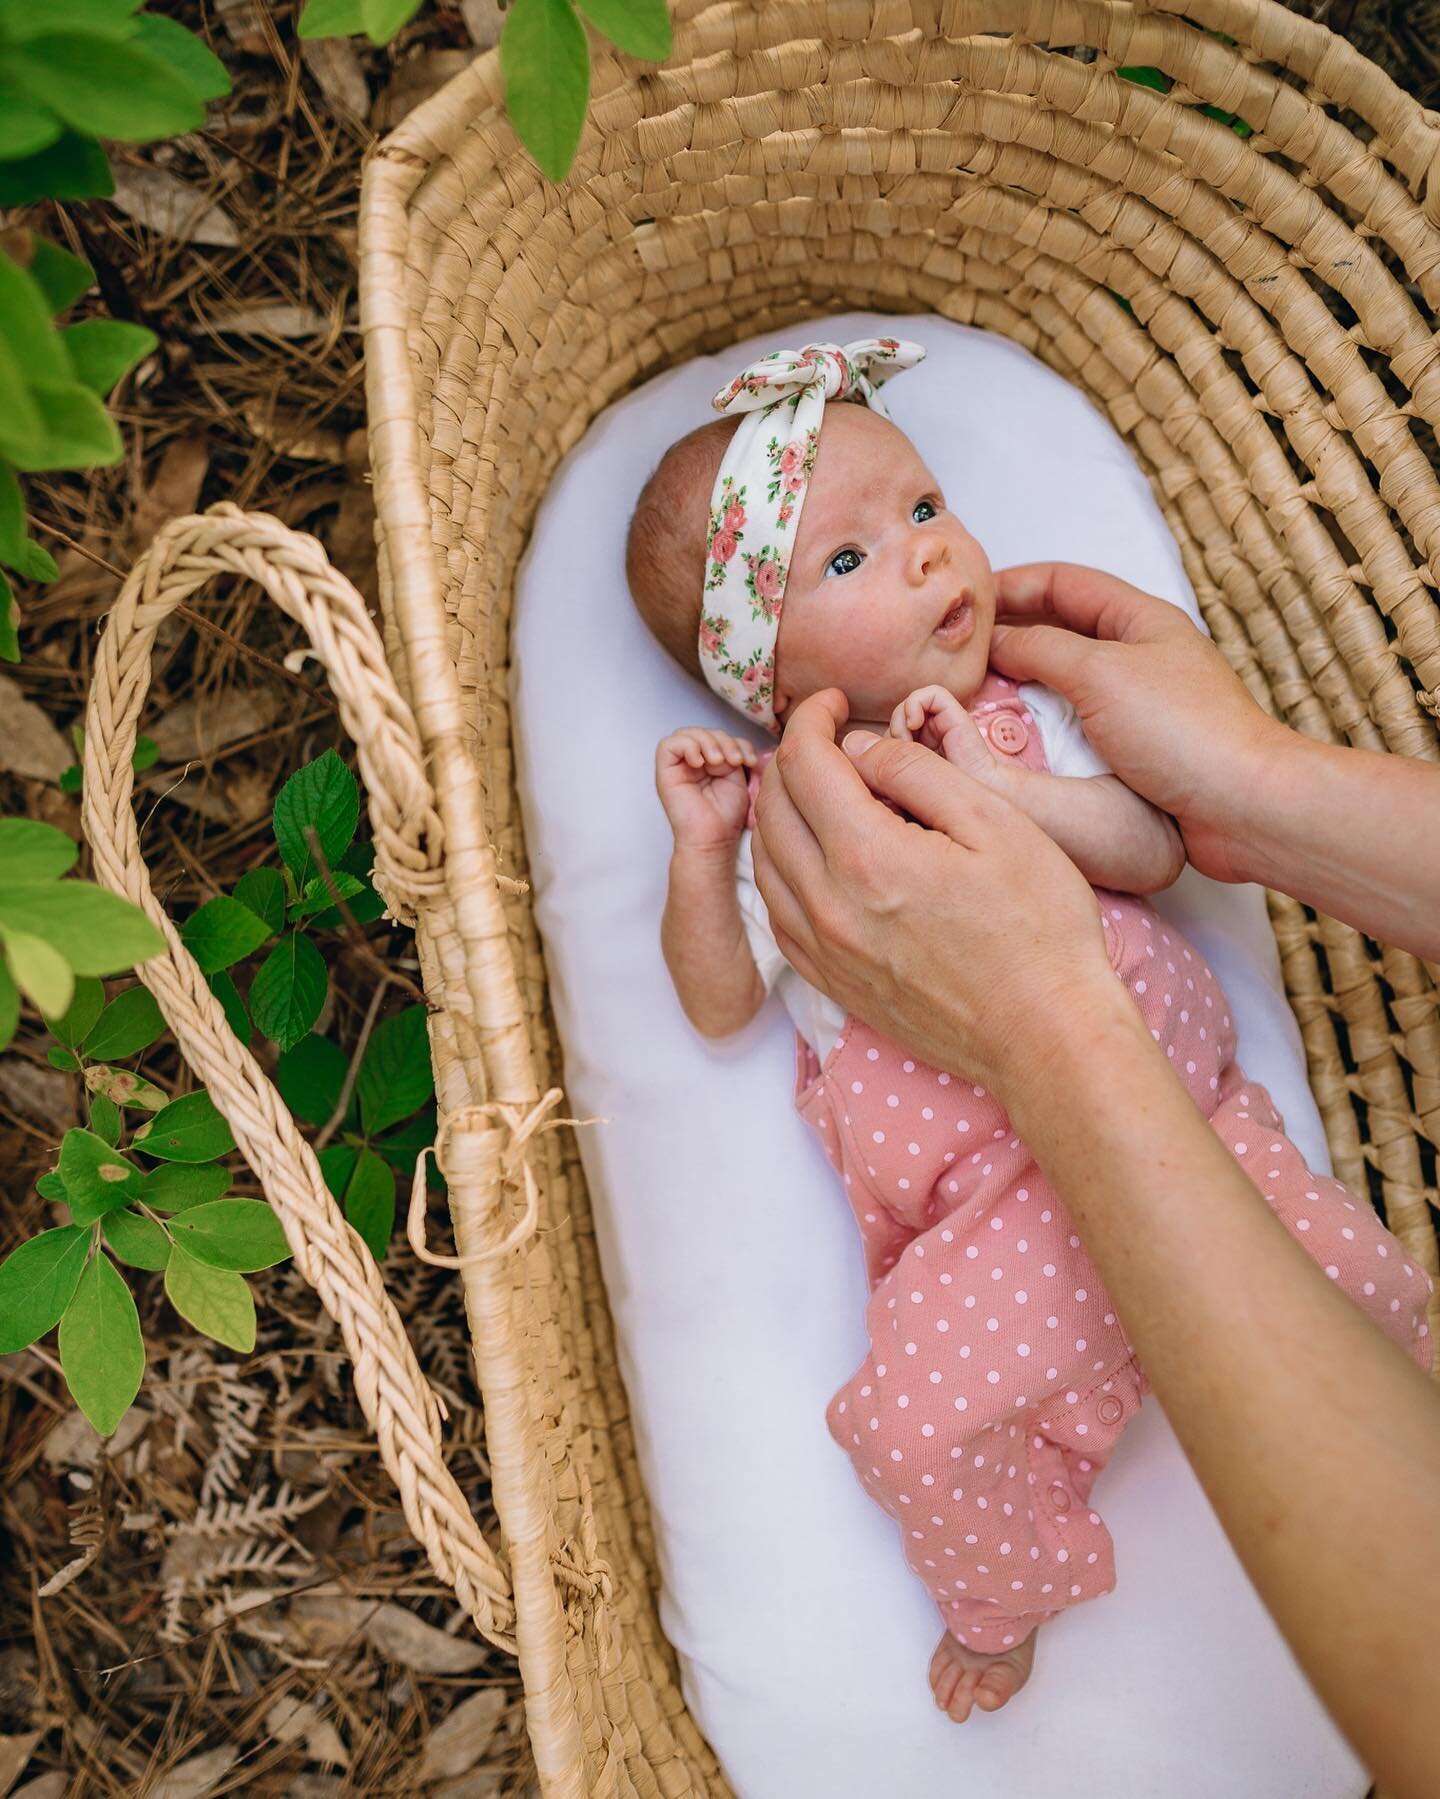 What&rsquo;s cuter than a baby in a basket? Nothing, that&rsquo;s what. 😍

So glad I got to meet sweet baby Maddie at just one month old! Isn&rsquo;t she a doll?! 💜

Also&mdash;Attention!! ⚠️I still have spots available for my mini sessions on June